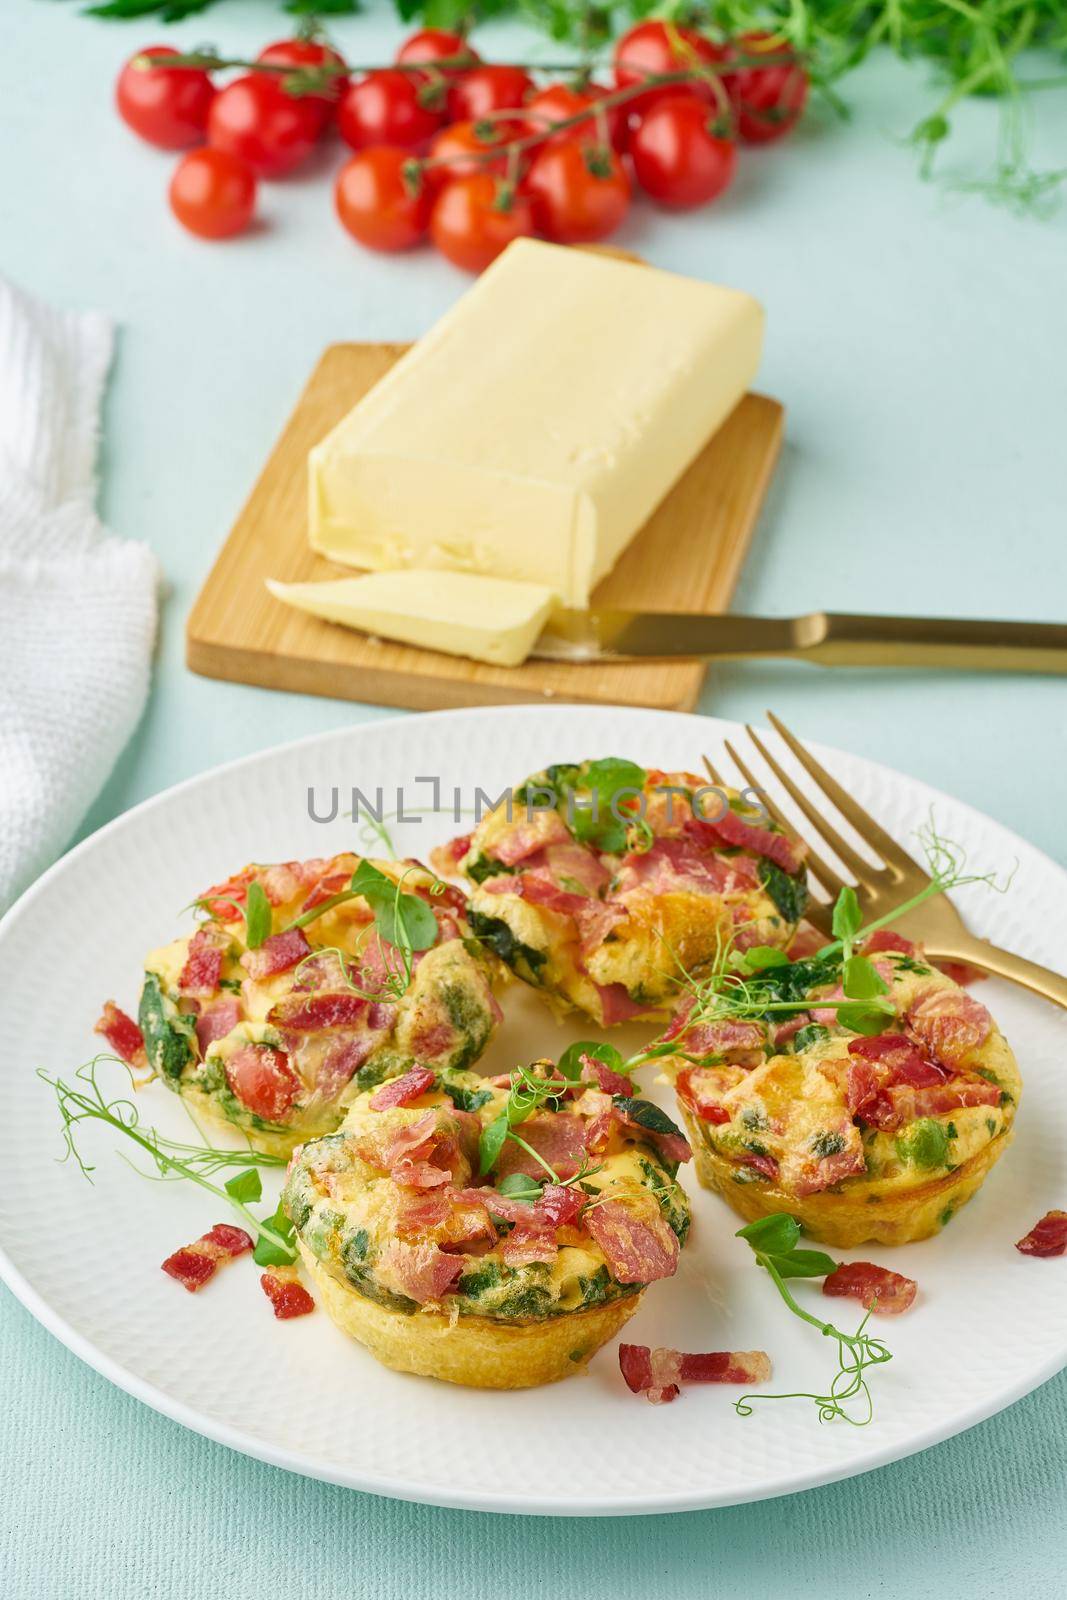 Egg muffin baked with bacon and tomato, ketogenic keto diet, pastel modern closeup vertical by NataBene